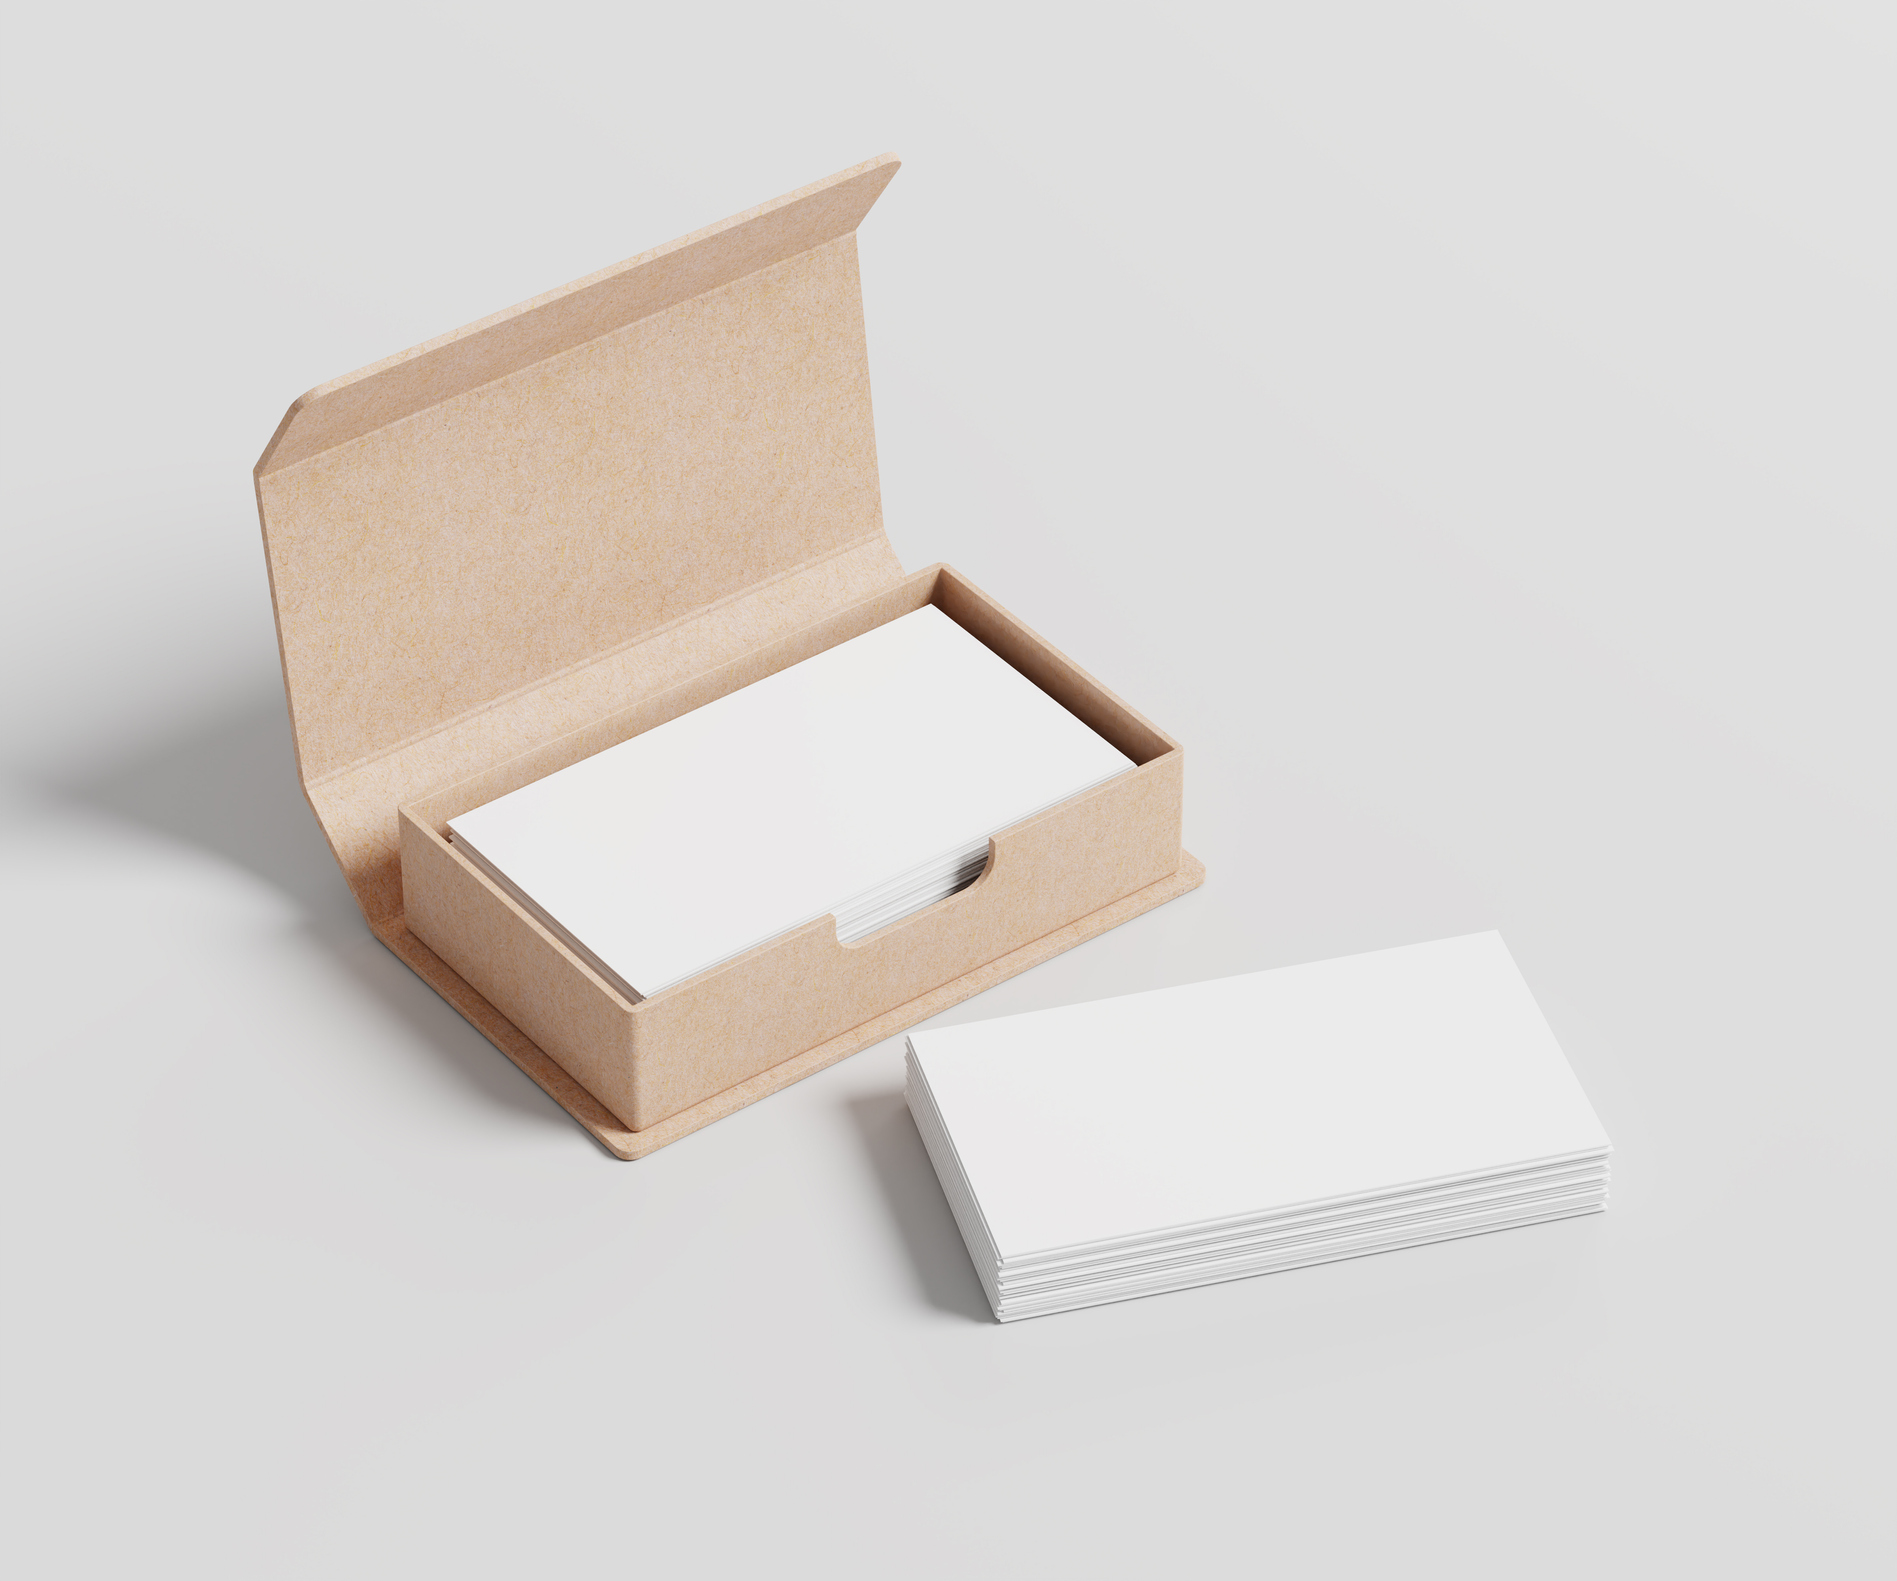 Where to buy eco-friendly business cards online